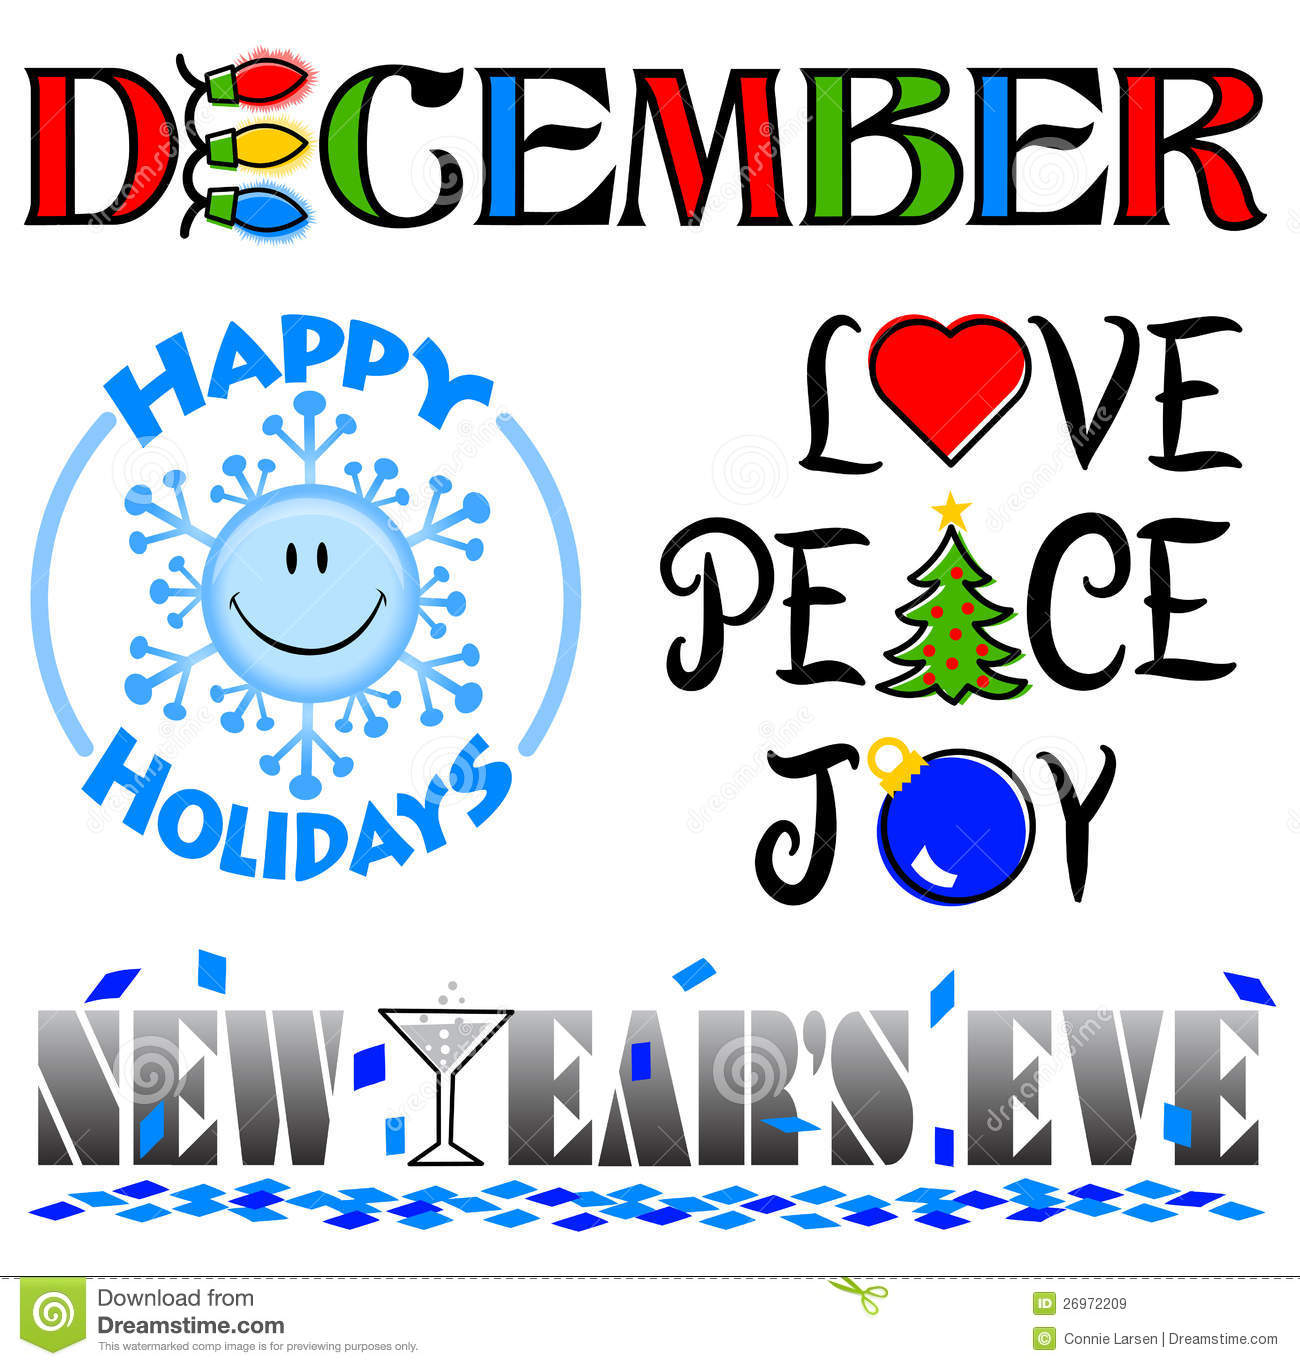 december holiday clipart